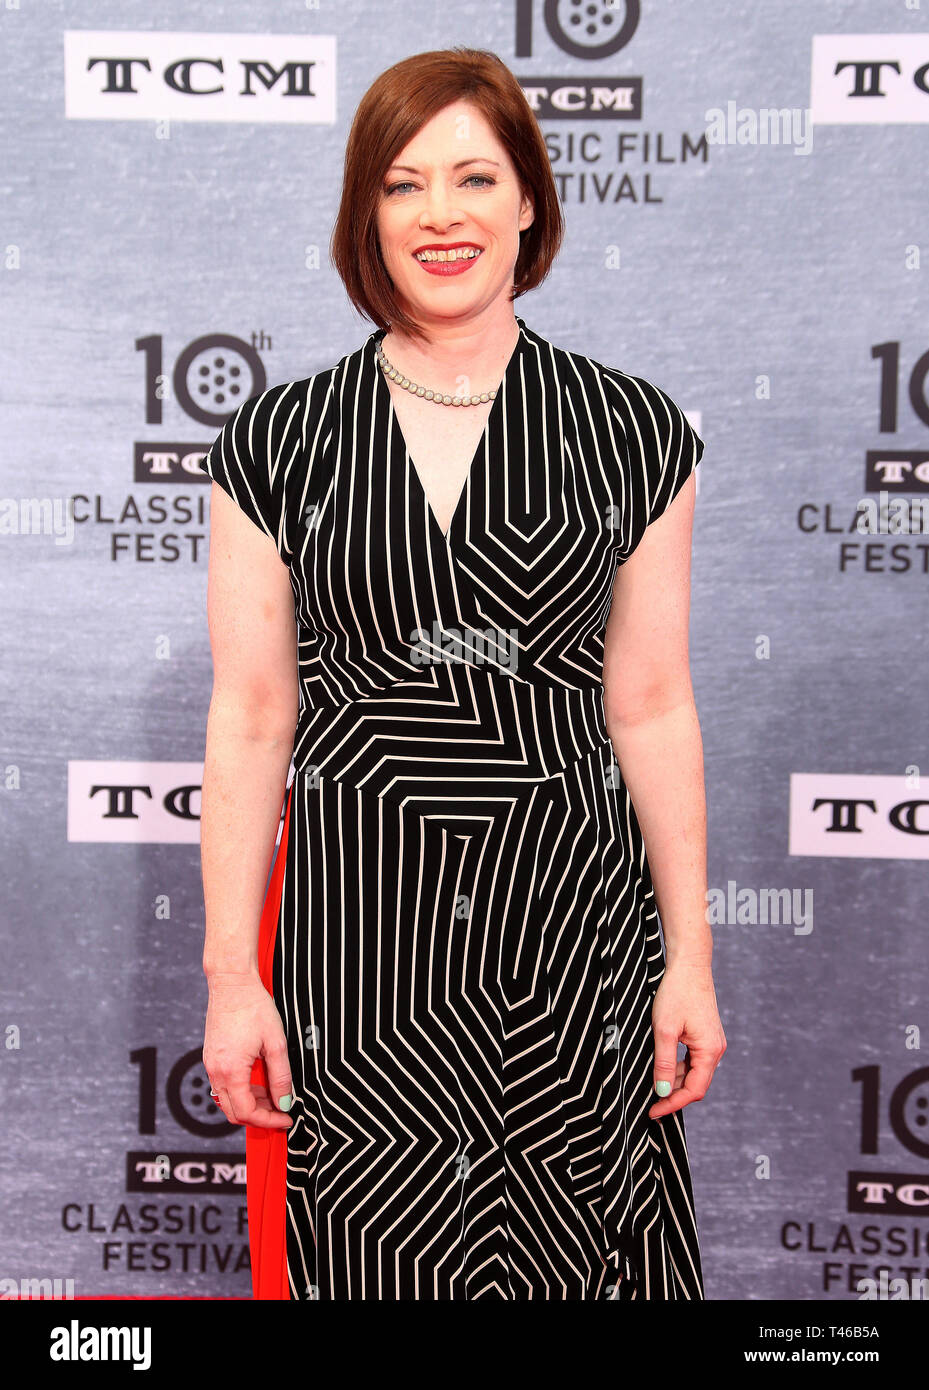 April 11, 2019 - Hollywood, California, U.S. - 11 April 2019 - Hollywood, California - . 2019 TCM Classic Film Festival Opening Night Gala And 30th Anniversary Screening Of ''When Harry Met Sally'' held at TCL Chinese Theatre. Photo Credit: Faye Sadou/AdMedia11 April 2019 - Hollywood, California - Genevieve McGillicuddy. 2019 TCM Classic Film Festival Opening Night Gala And 30th Anniversary Screening Of ''When Harry Met Sally'' held at TCL Chinese Theatre. Photo Credit: Faye Sadou/AdMedia (Credit Image: © Faye Sadou/AdMedia via ZUMA Wire) Stock Photo